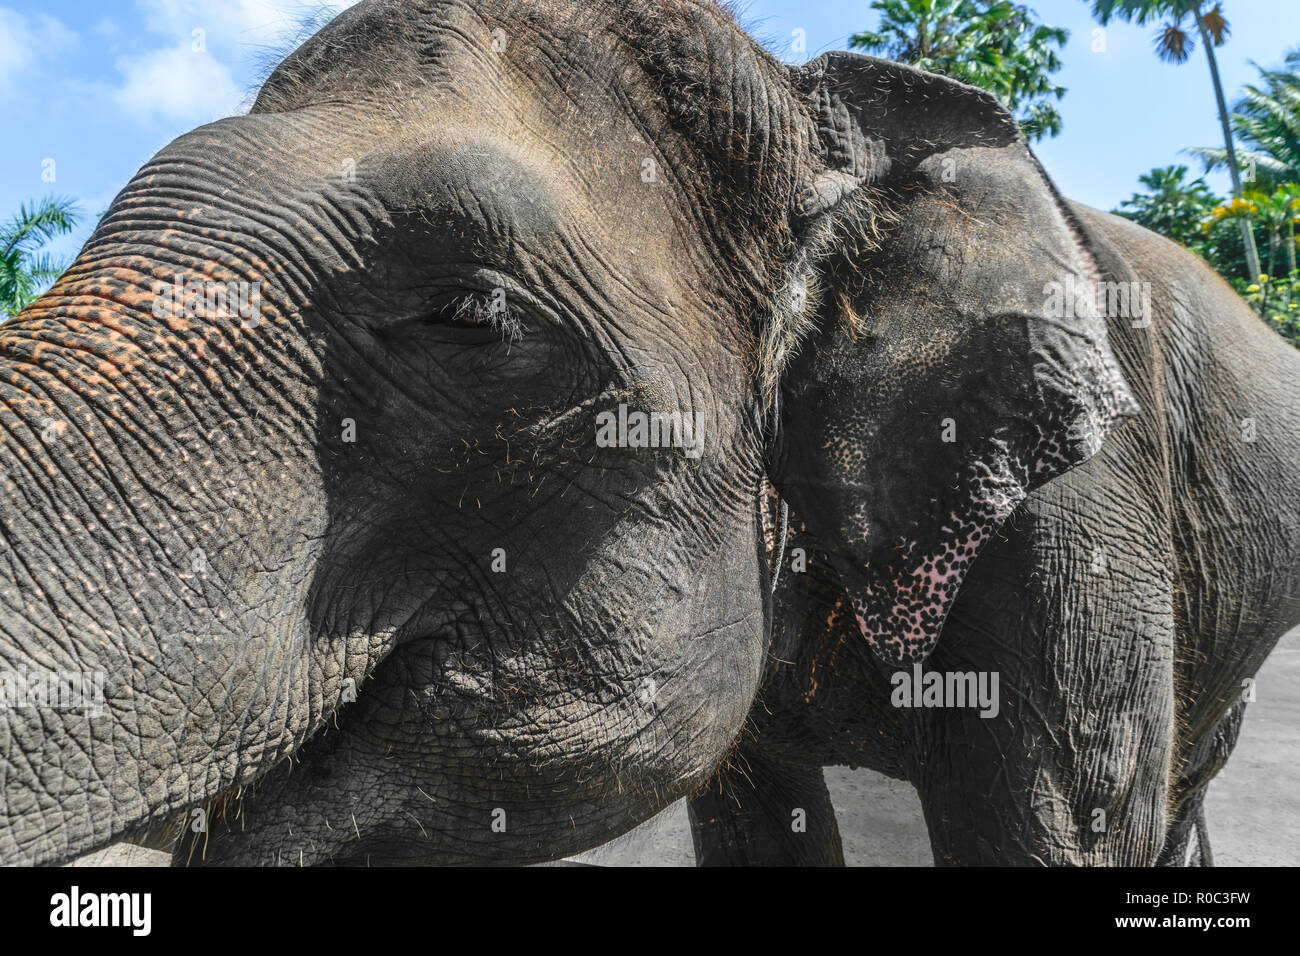 Profile view of huge Sumatra elephant trying to reach something with his trunk Stock Photo